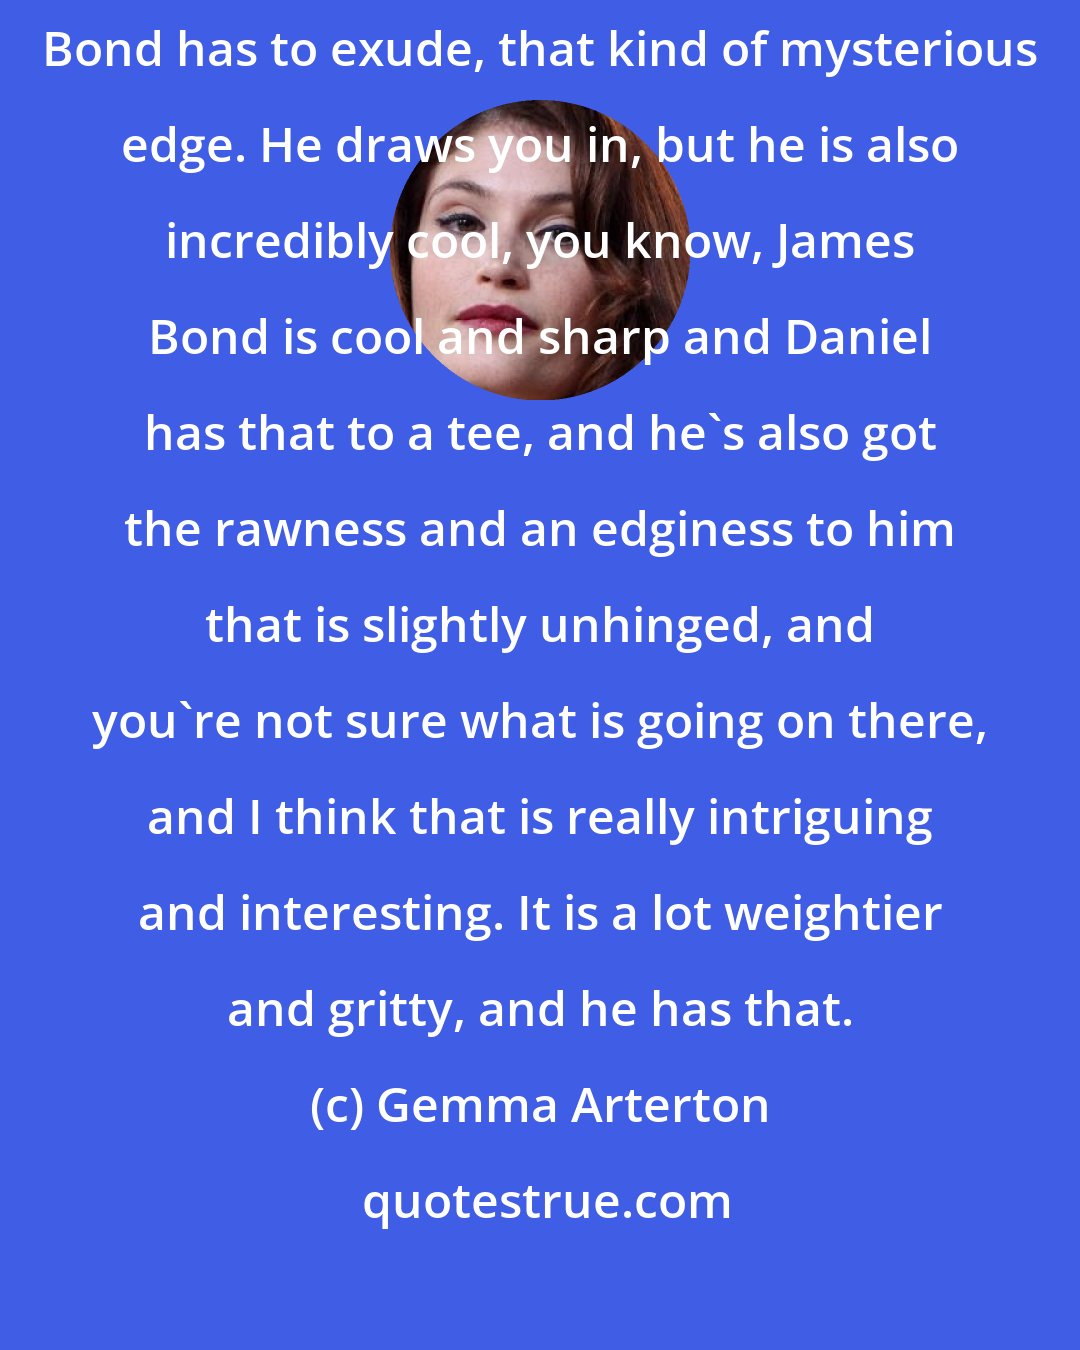 Gemma Arterton: He [Daniel Craig] is mysterious, and I think that that's the thing Bond has to exude, that kind of mysterious edge. He draws you in, but he is also incredibly cool, you know, James Bond is cool and sharp and Daniel has that to a tee, and he's also got the rawness and an edginess to him that is slightly unhinged, and you're not sure what is going on there, and I think that is really intriguing and interesting. It is a lot weightier and gritty, and he has that.